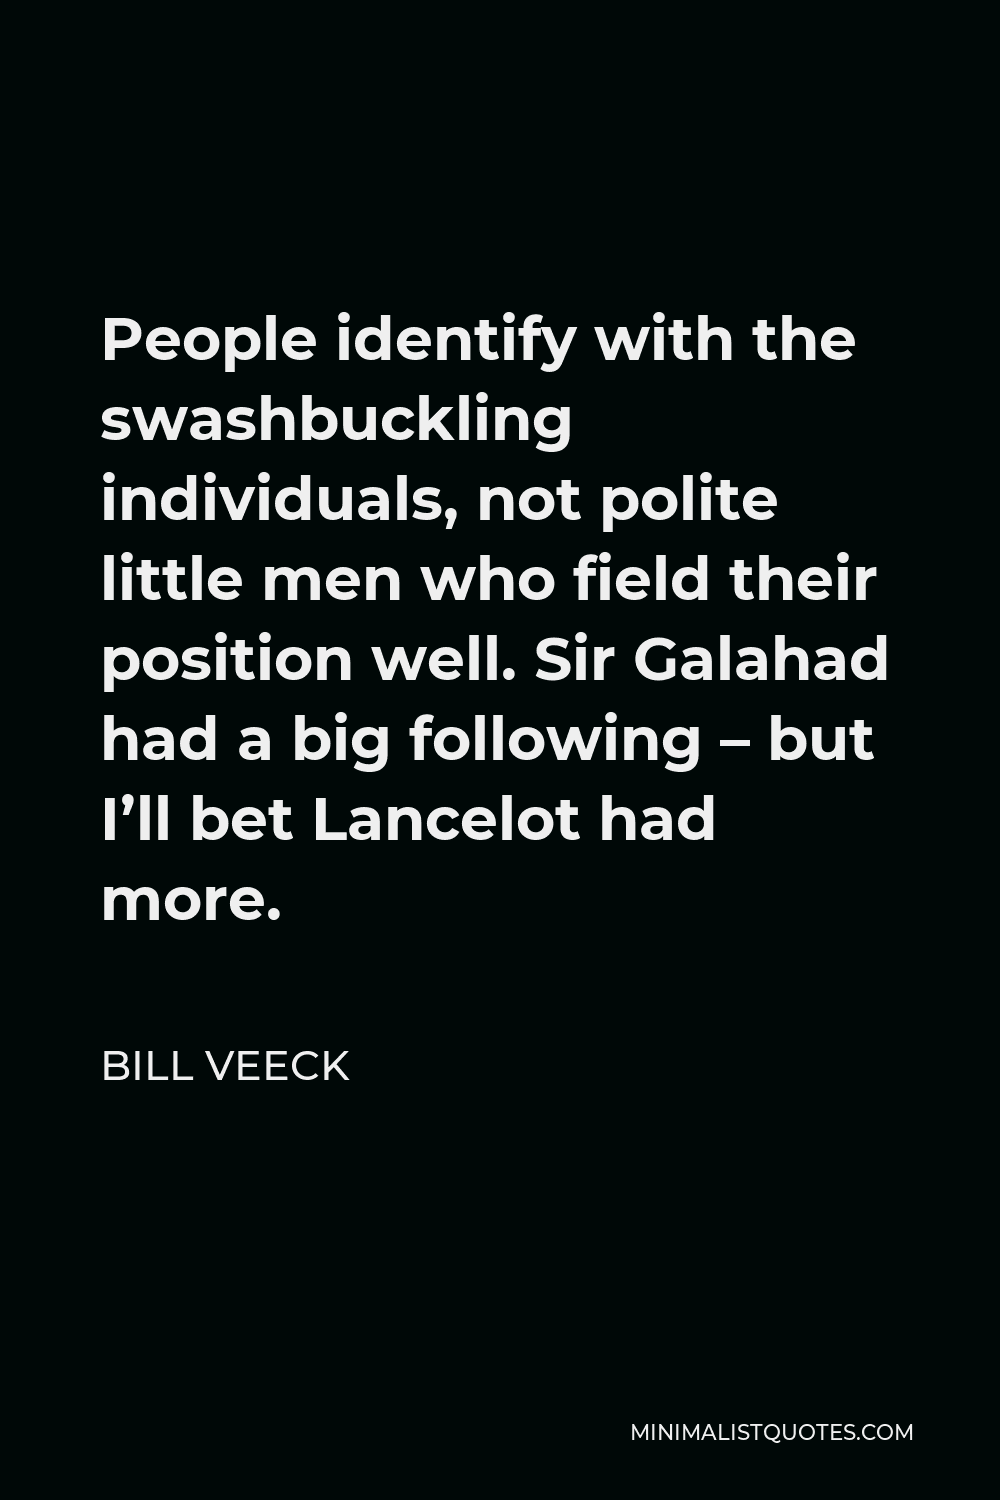 Bill Veeck Quote - People identify with the swashbuckling individuals, not polite little men who field their position well. Sir Galahad had a big following – but I’ll bet Lancelot had more.